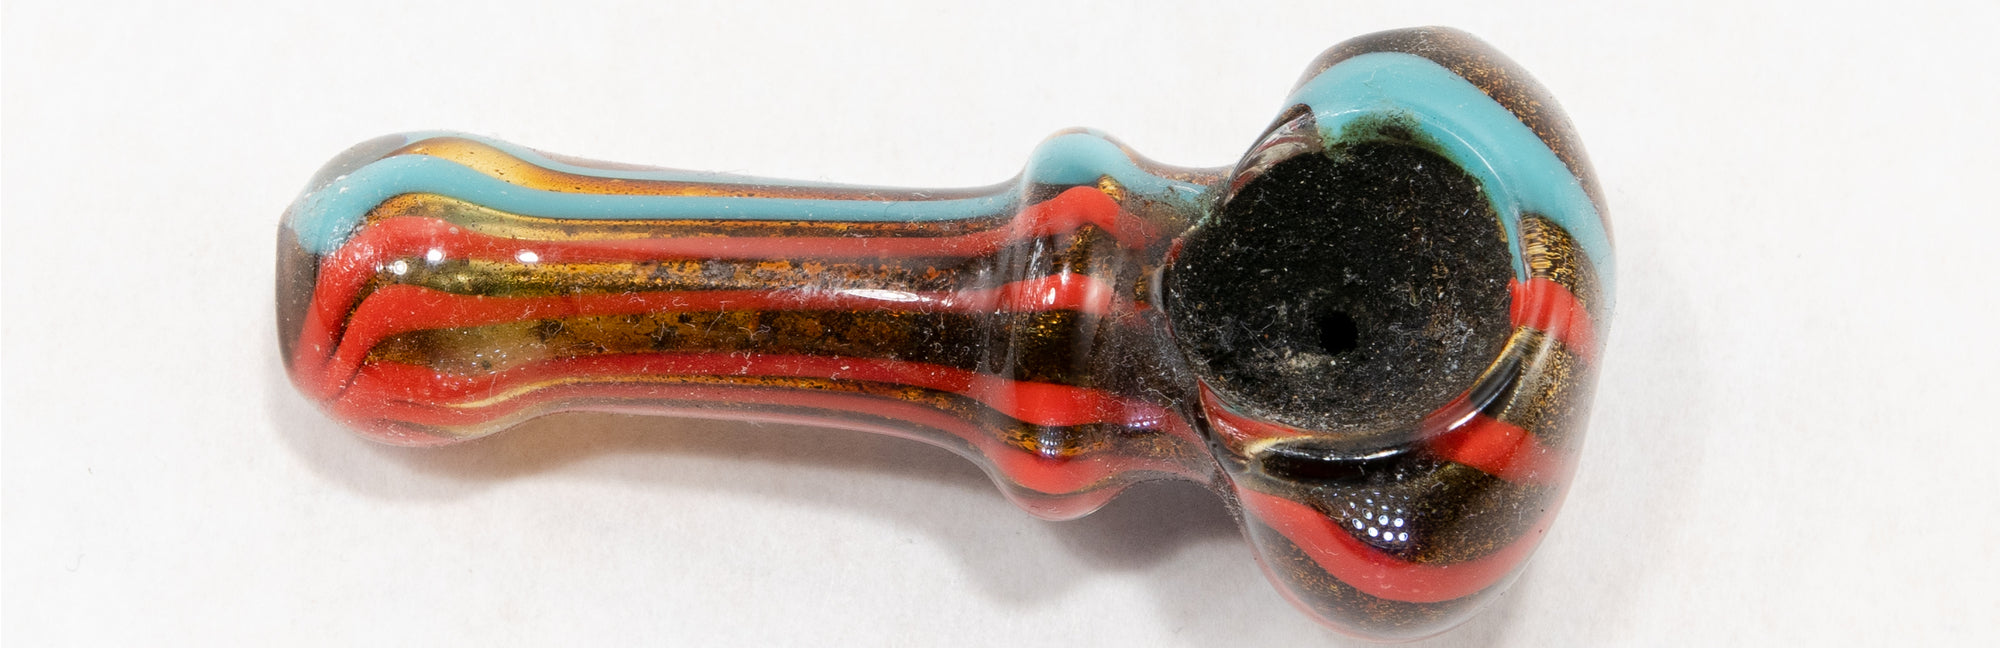 How to Clean Cannabis Pipes: A Guide To Cleaning Weed Pipes